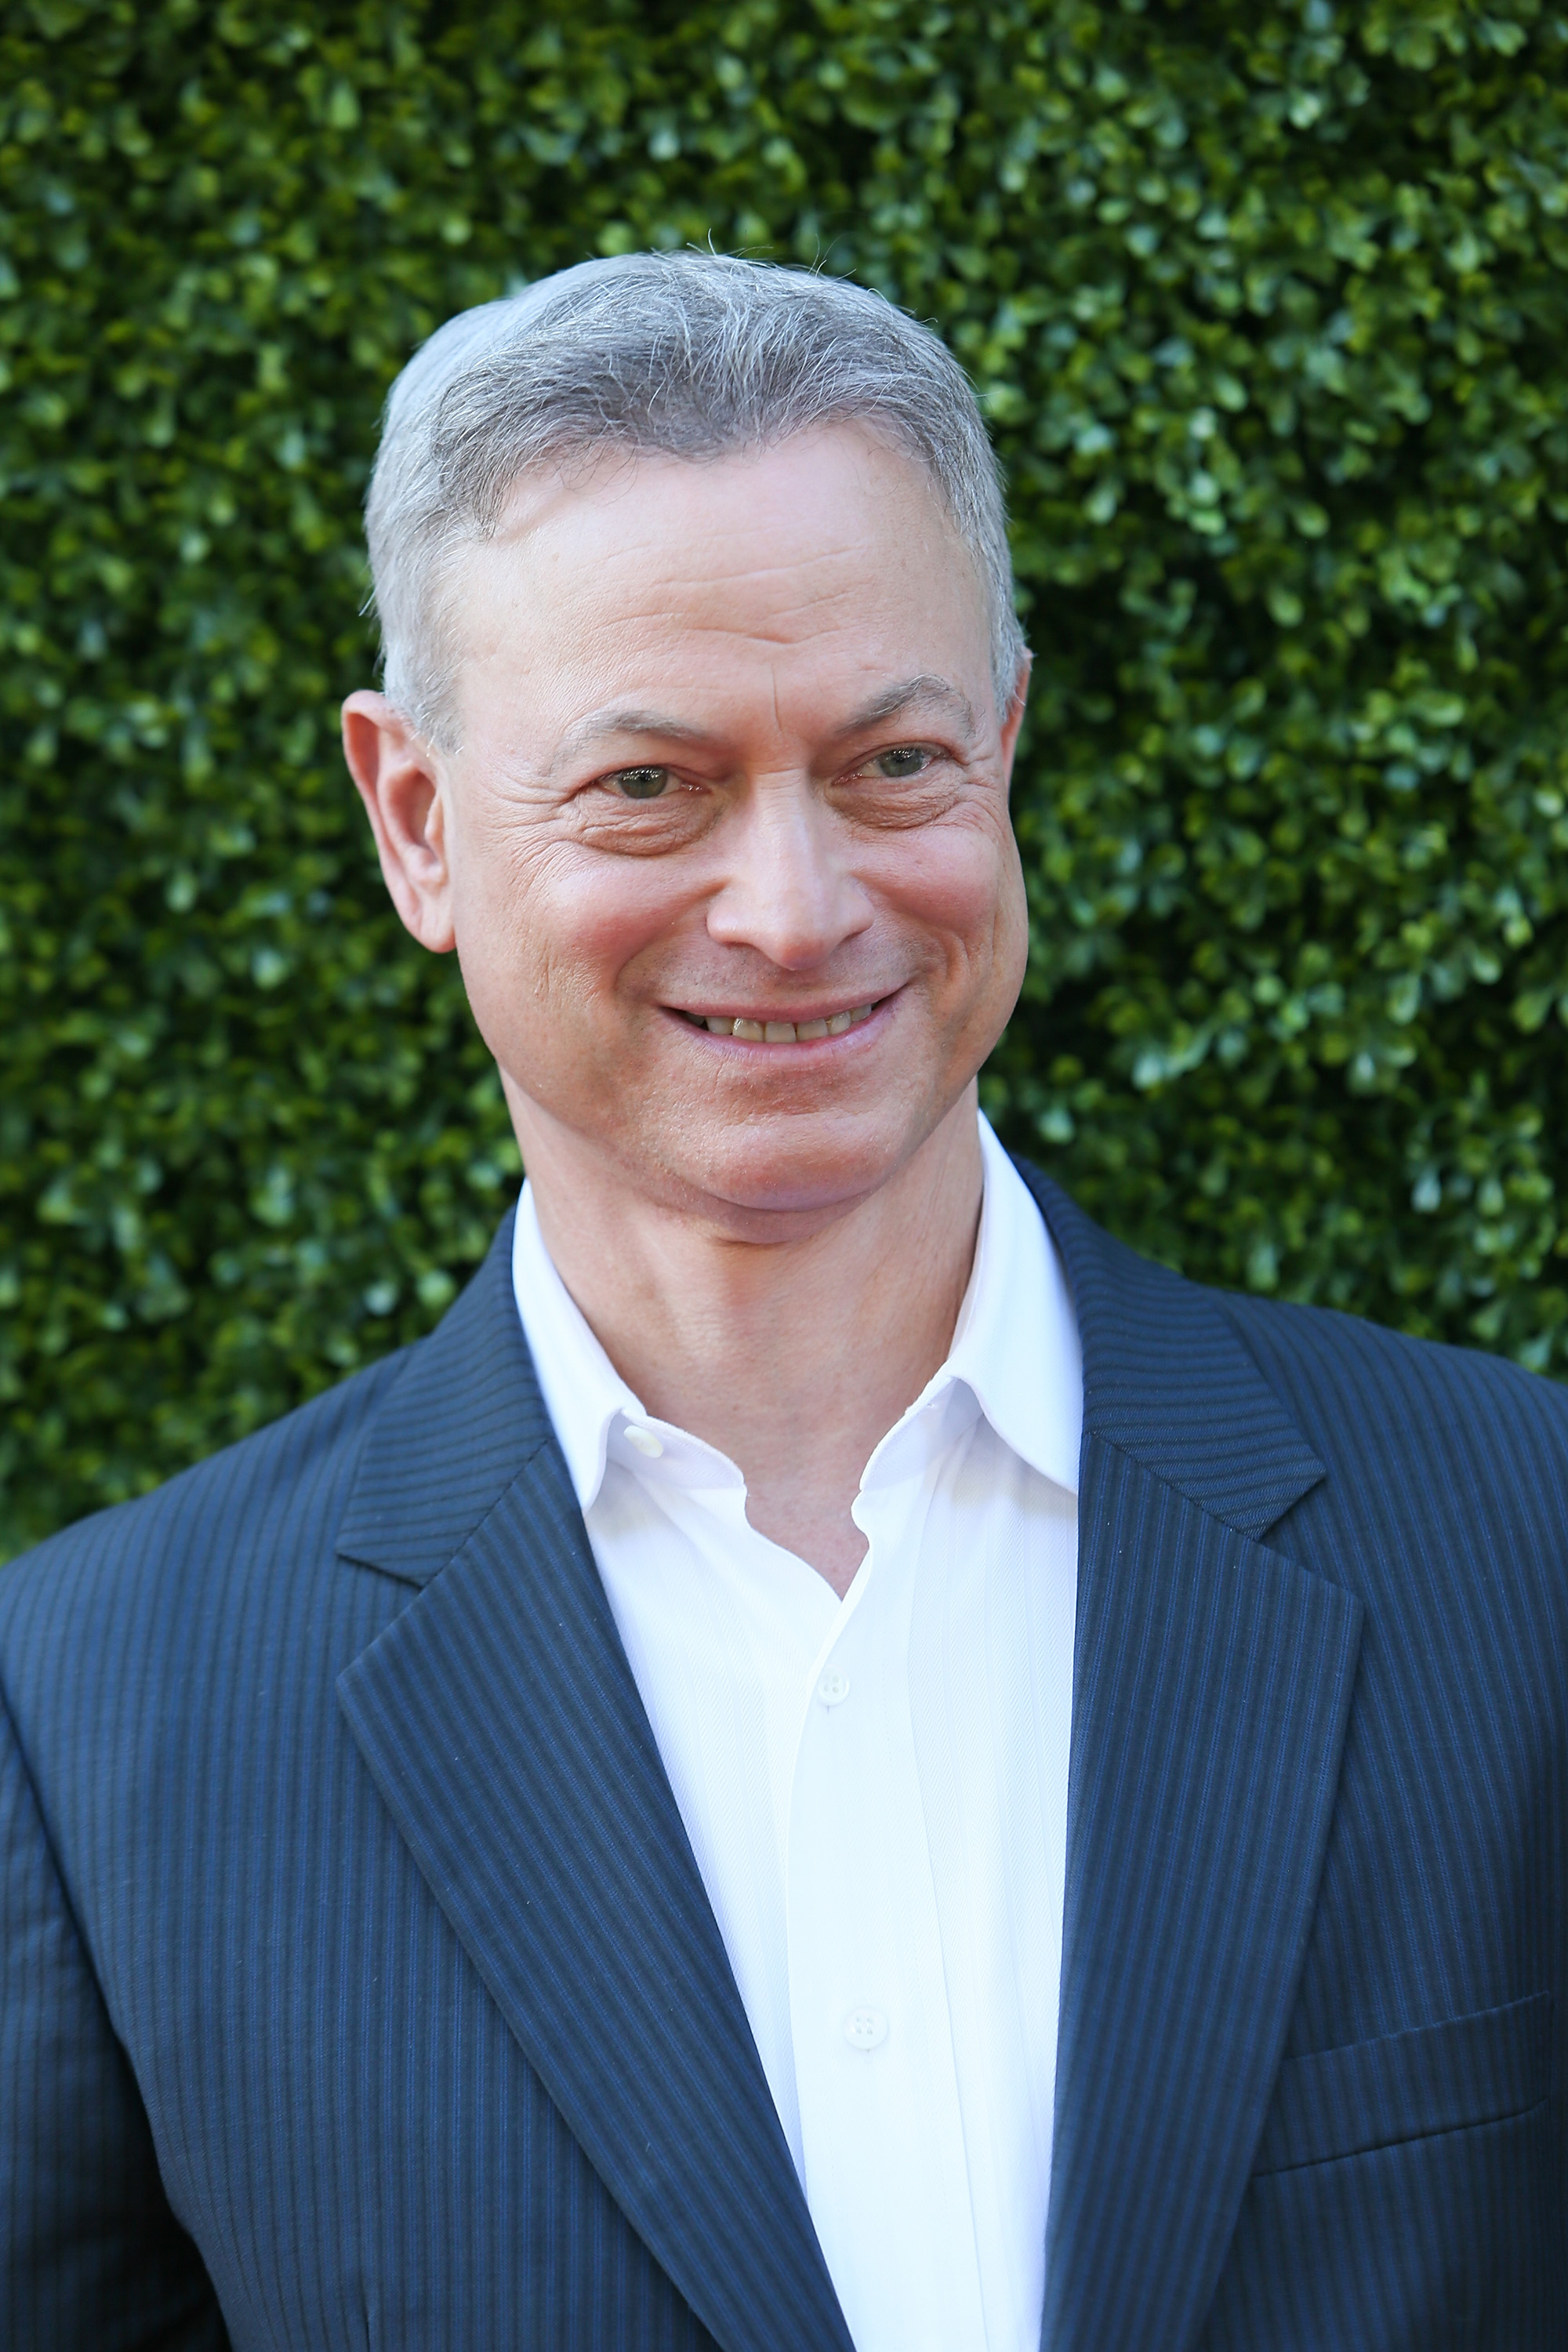 Gary Sinise arrives at the CBS, CW, Showtime Summer TCA Party at the Pacific Design Center in West Hollywood, California, on August 10, 2016. | Source: Getty Images